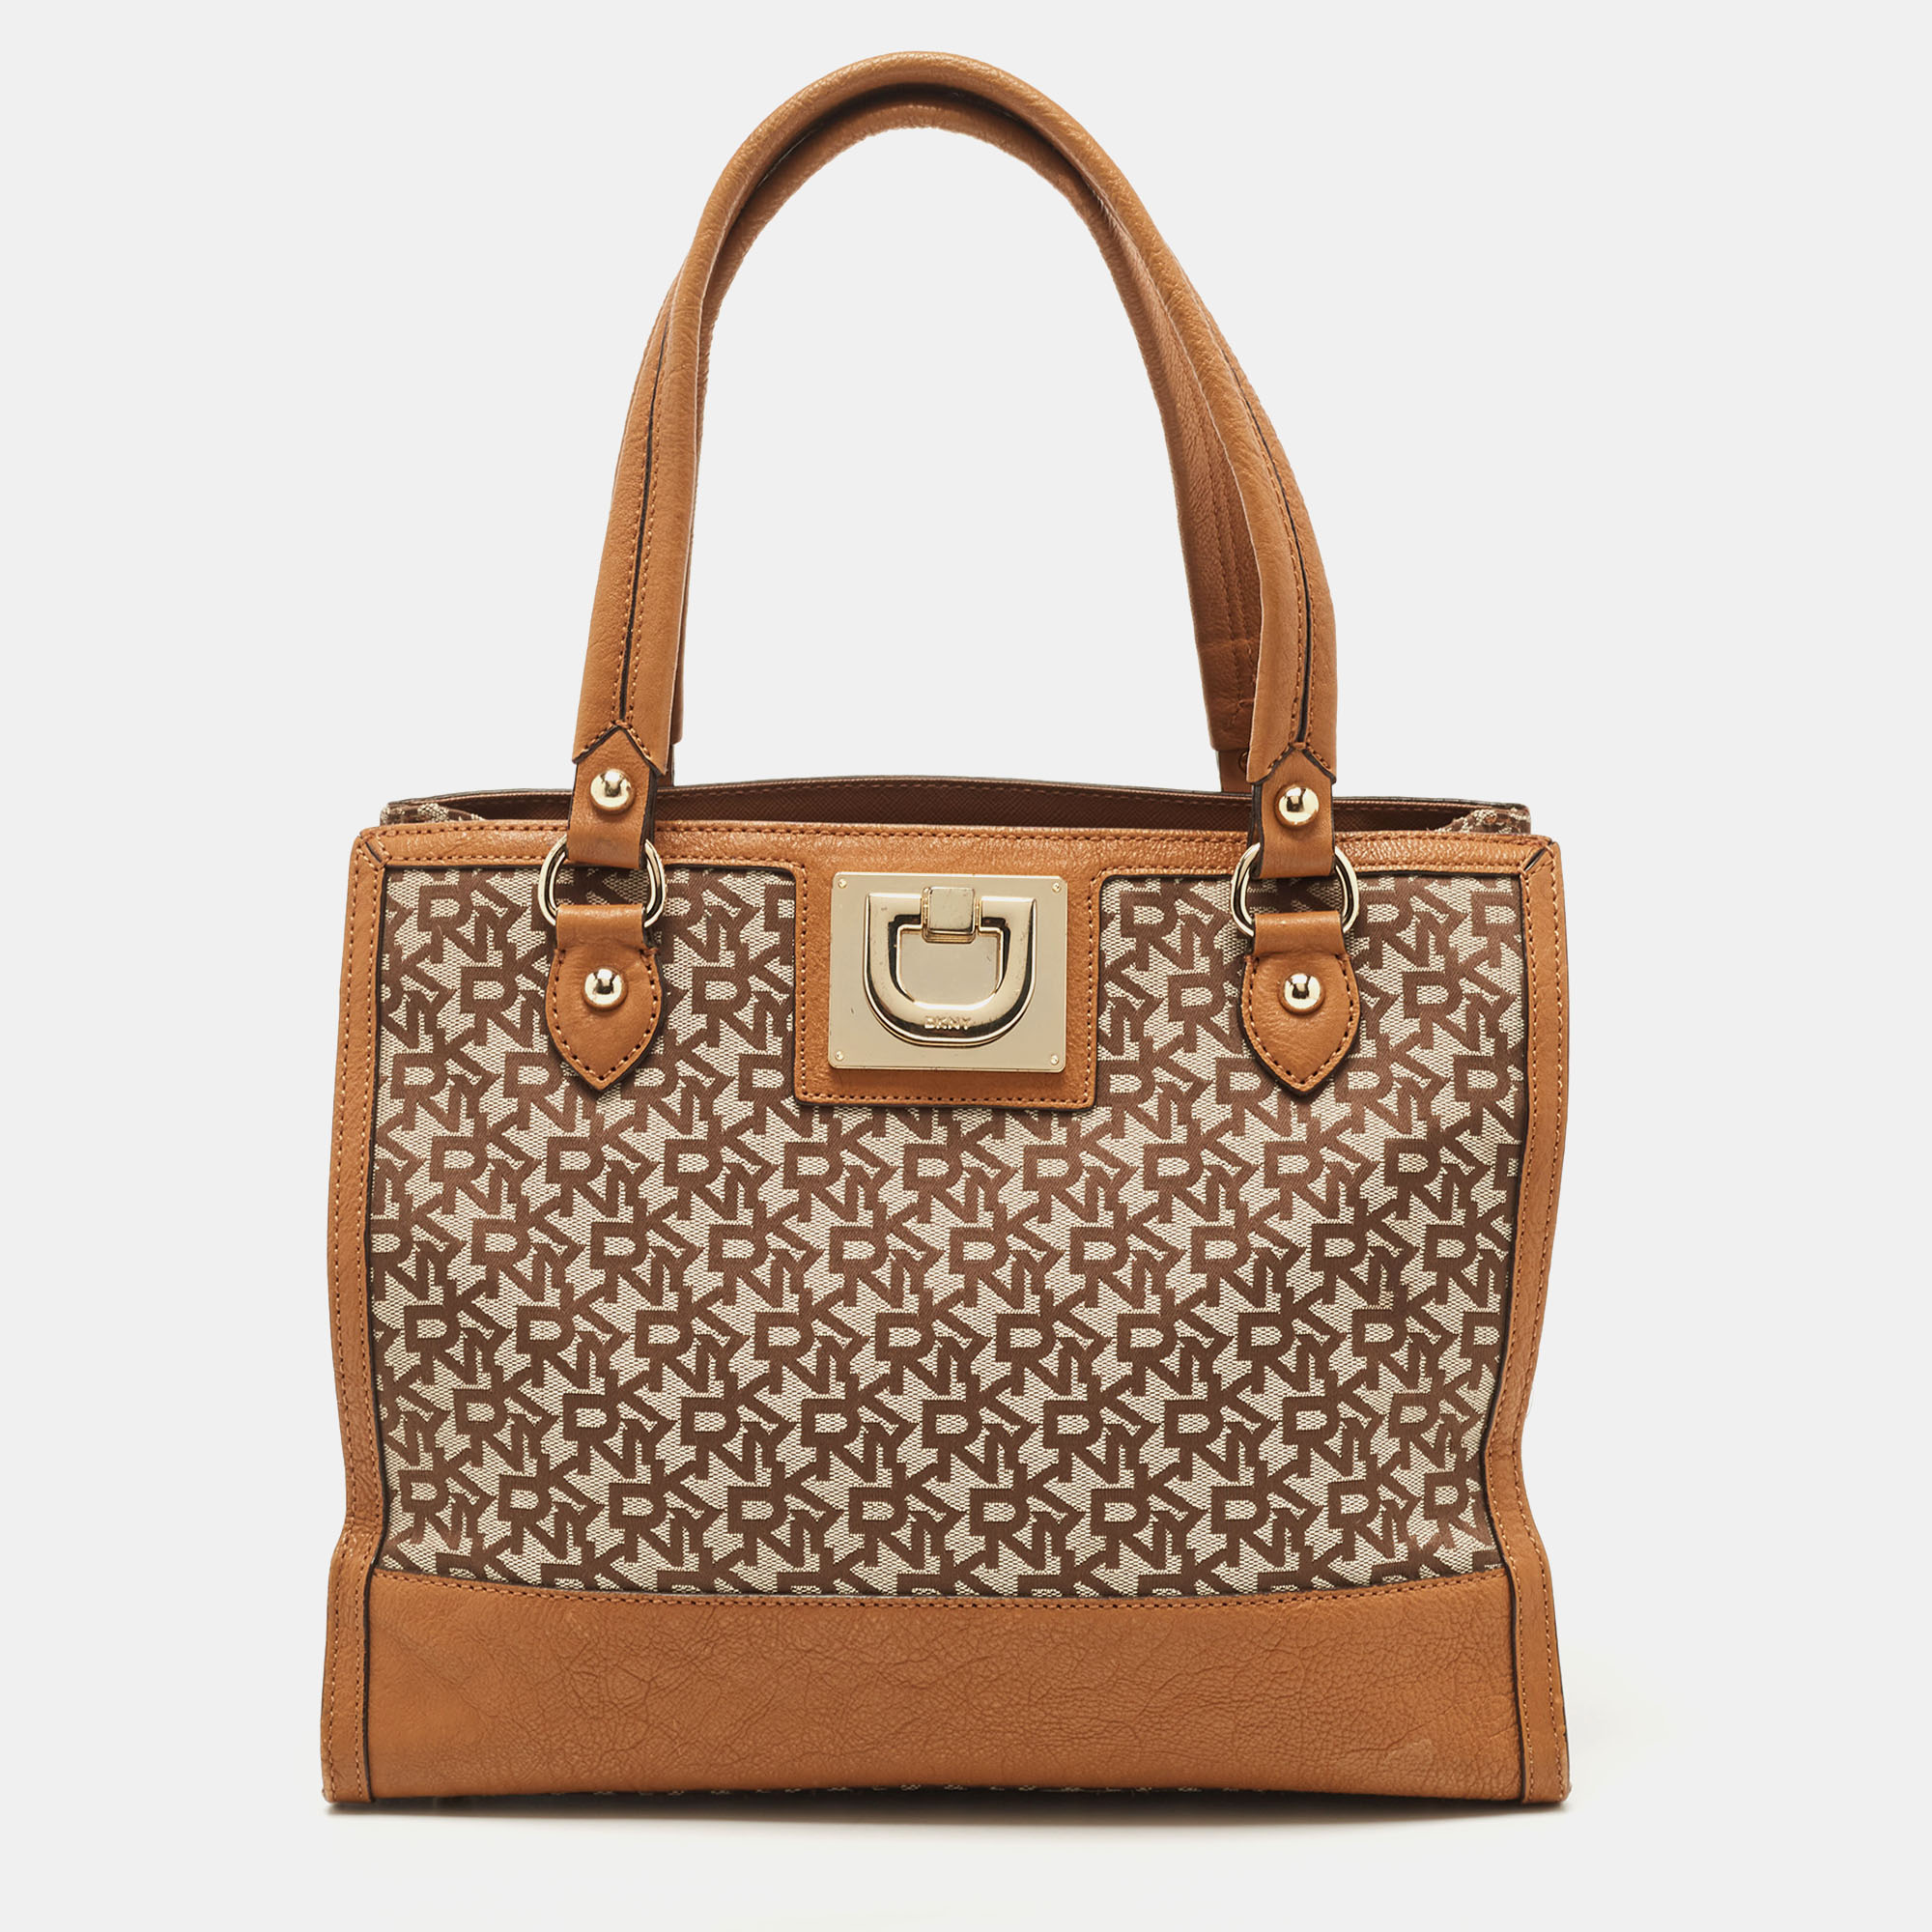 DKNY Brown/Beige Signature Canvas And Leather Tote